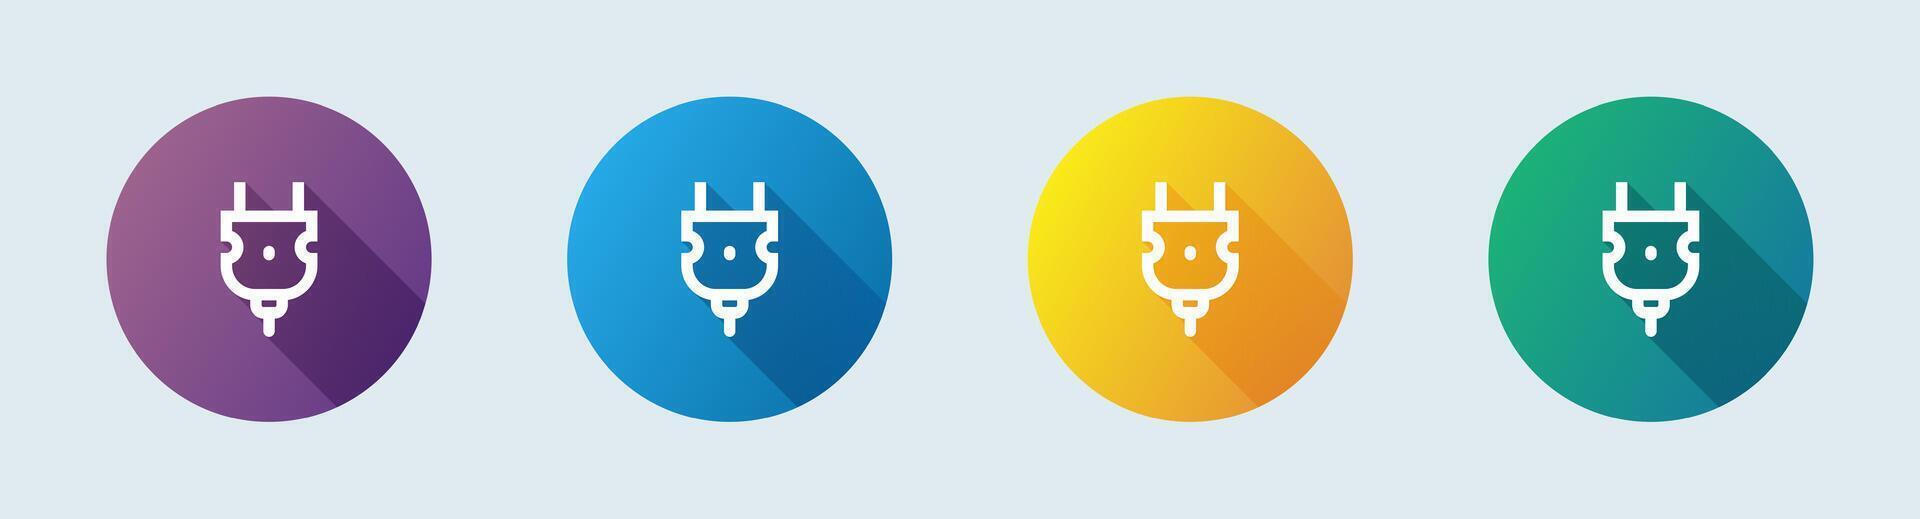 Socket line icon in flat design style. Power plug signs illustration. vector